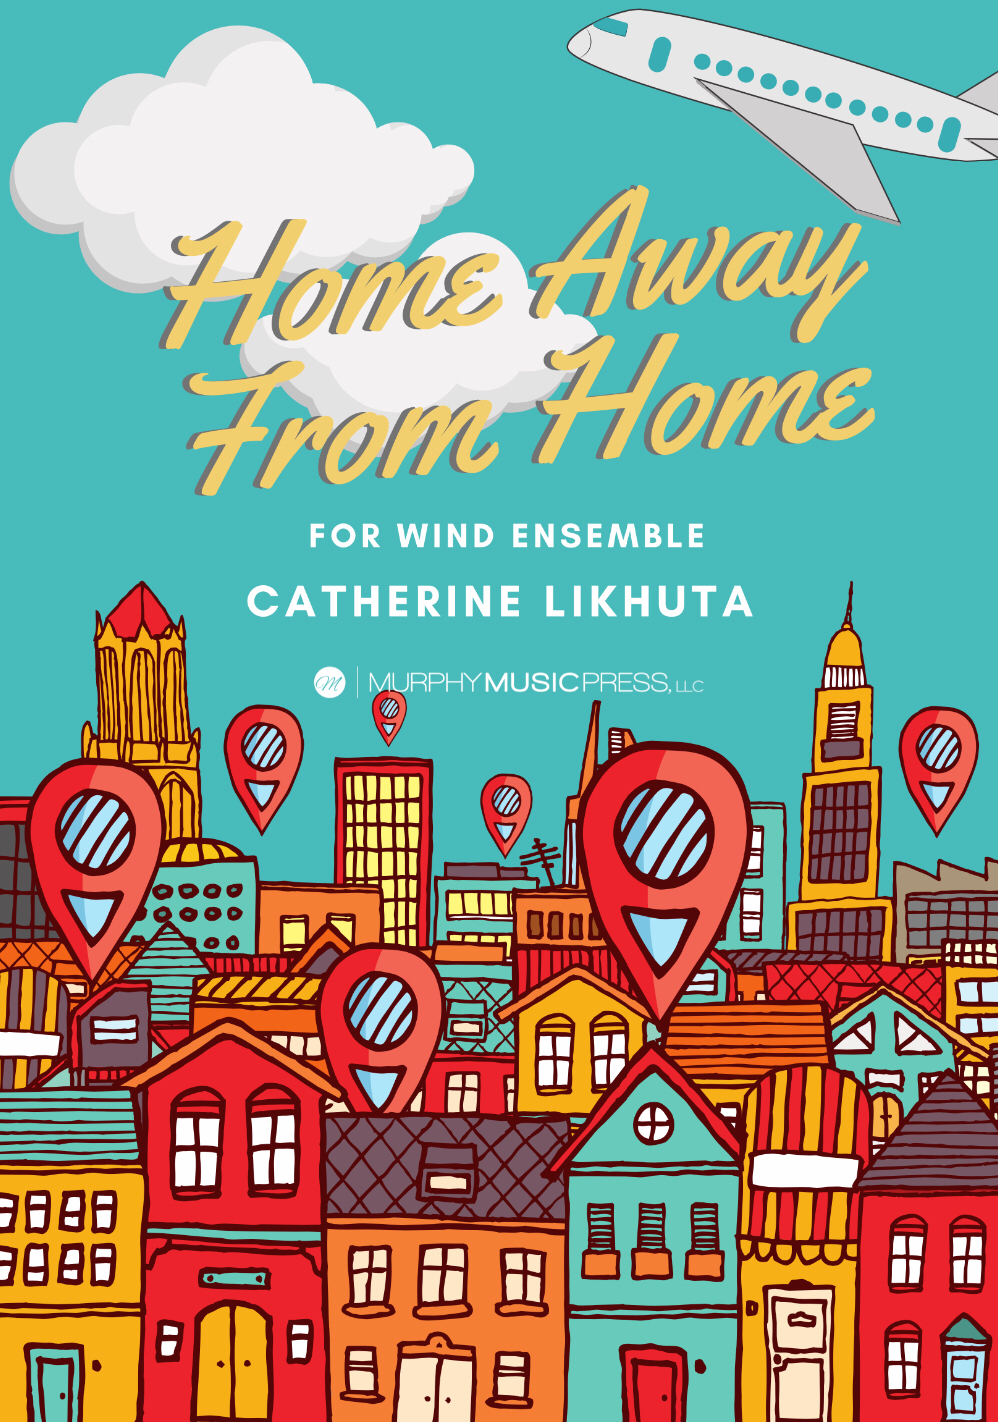 Home Away From Home by Catherine Likhuta